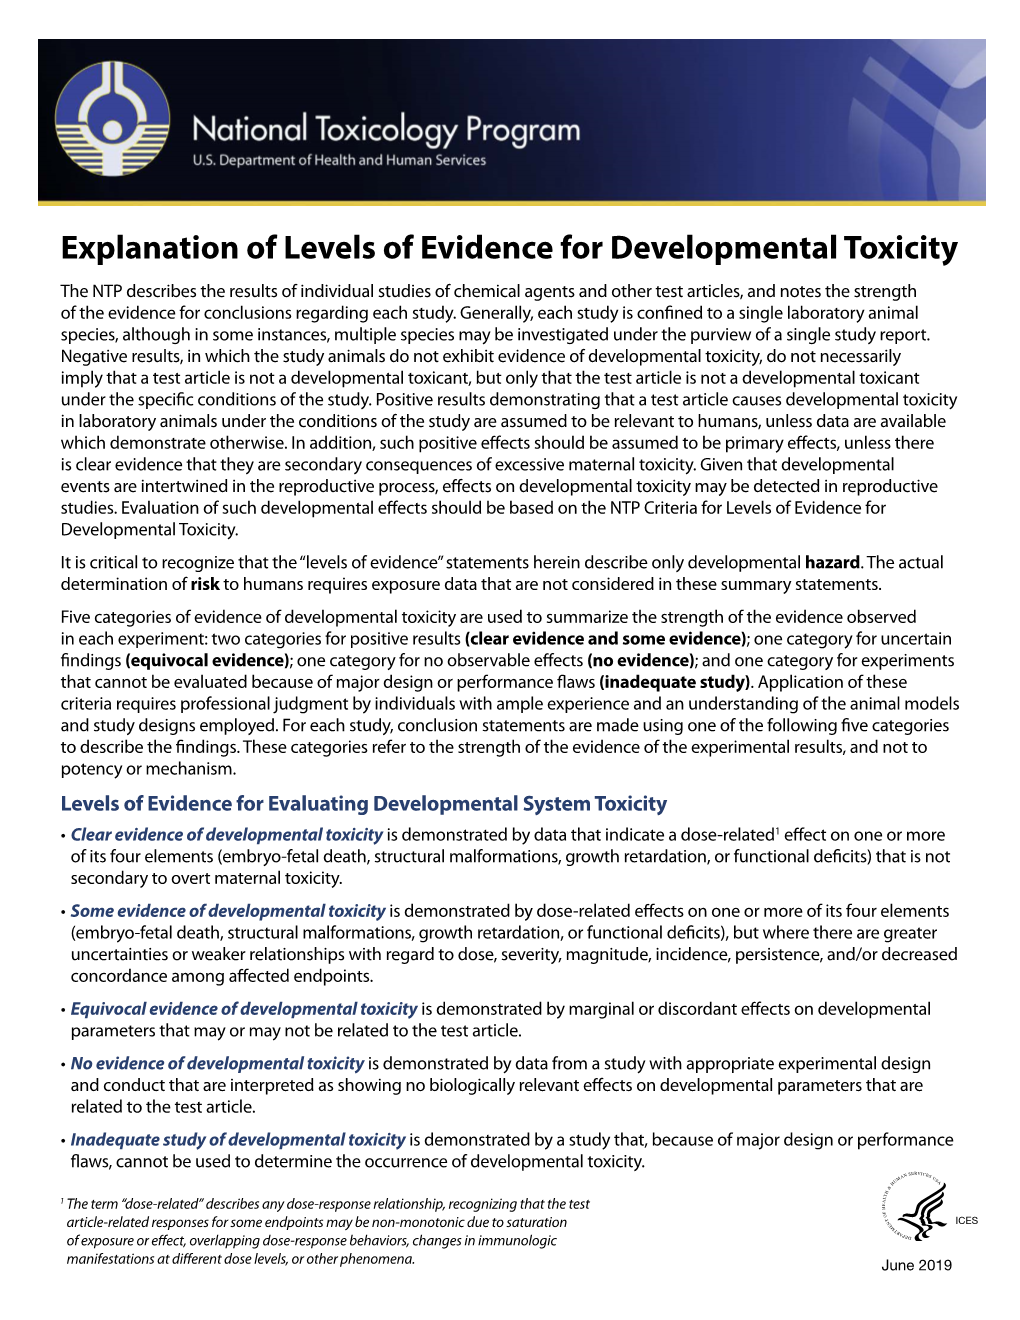 Explanation of Levels of Evidence For